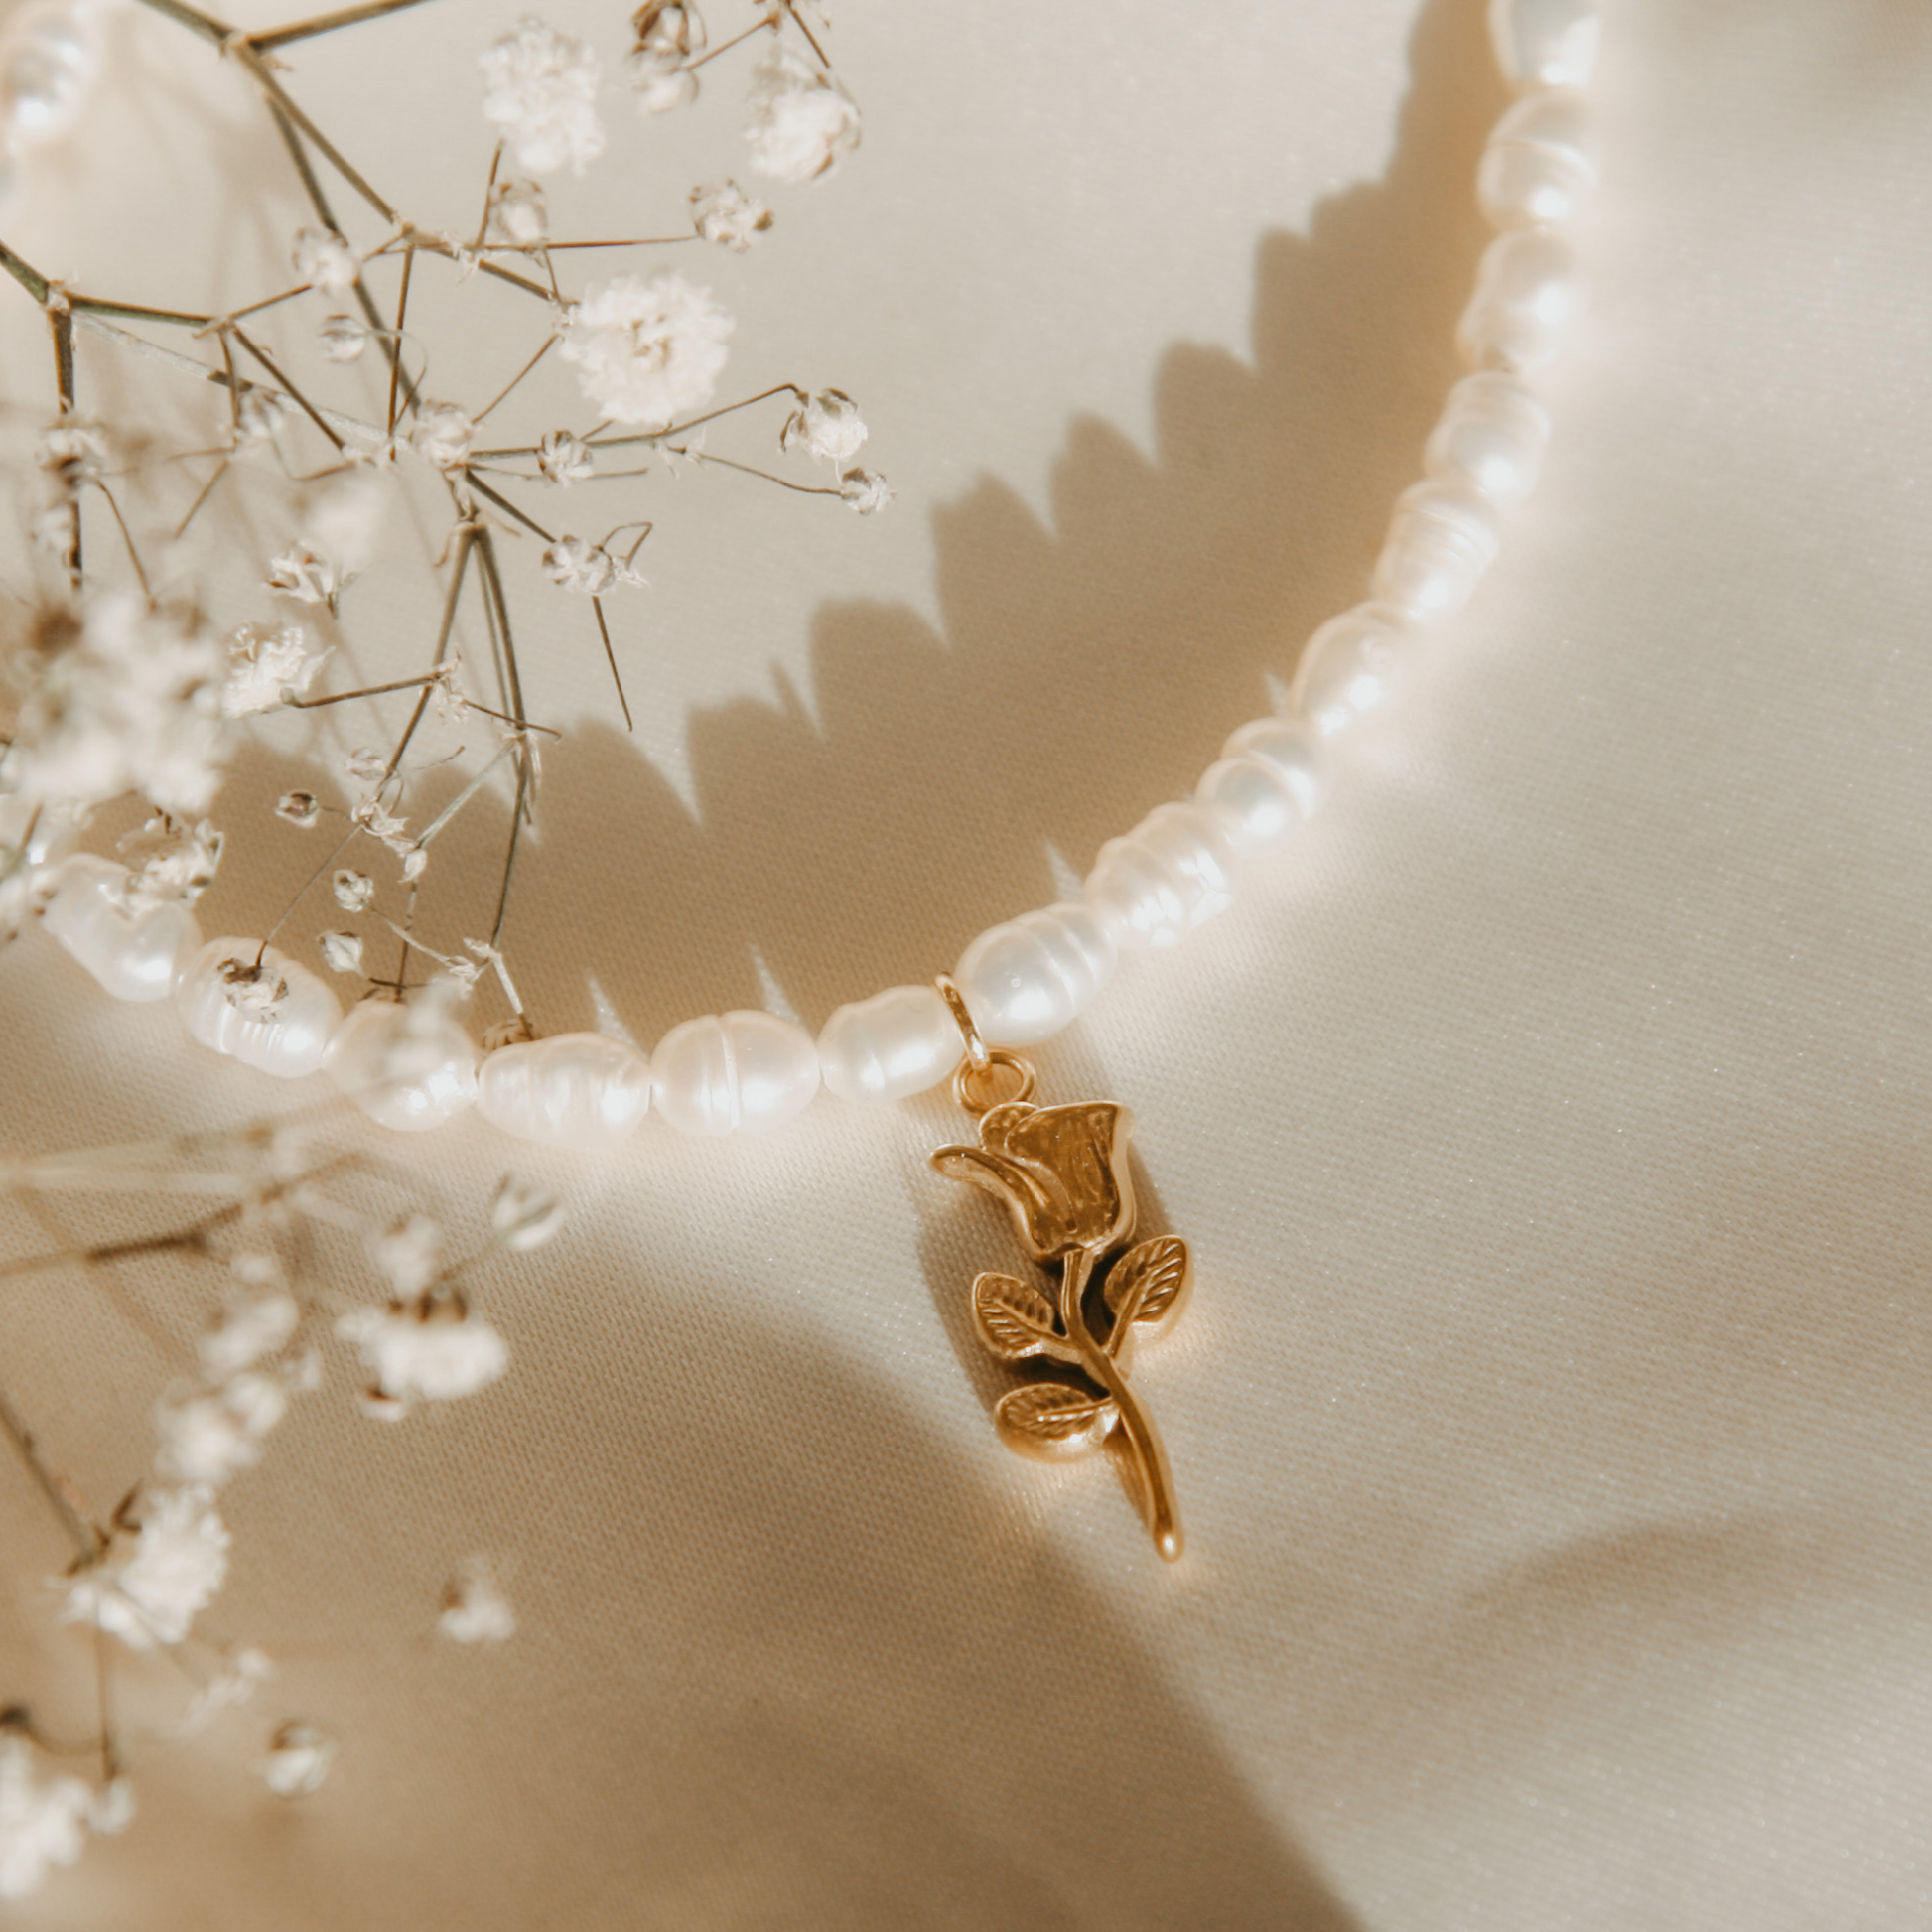 beauty and the beast inspired rose pearl necklace by Avery Faye